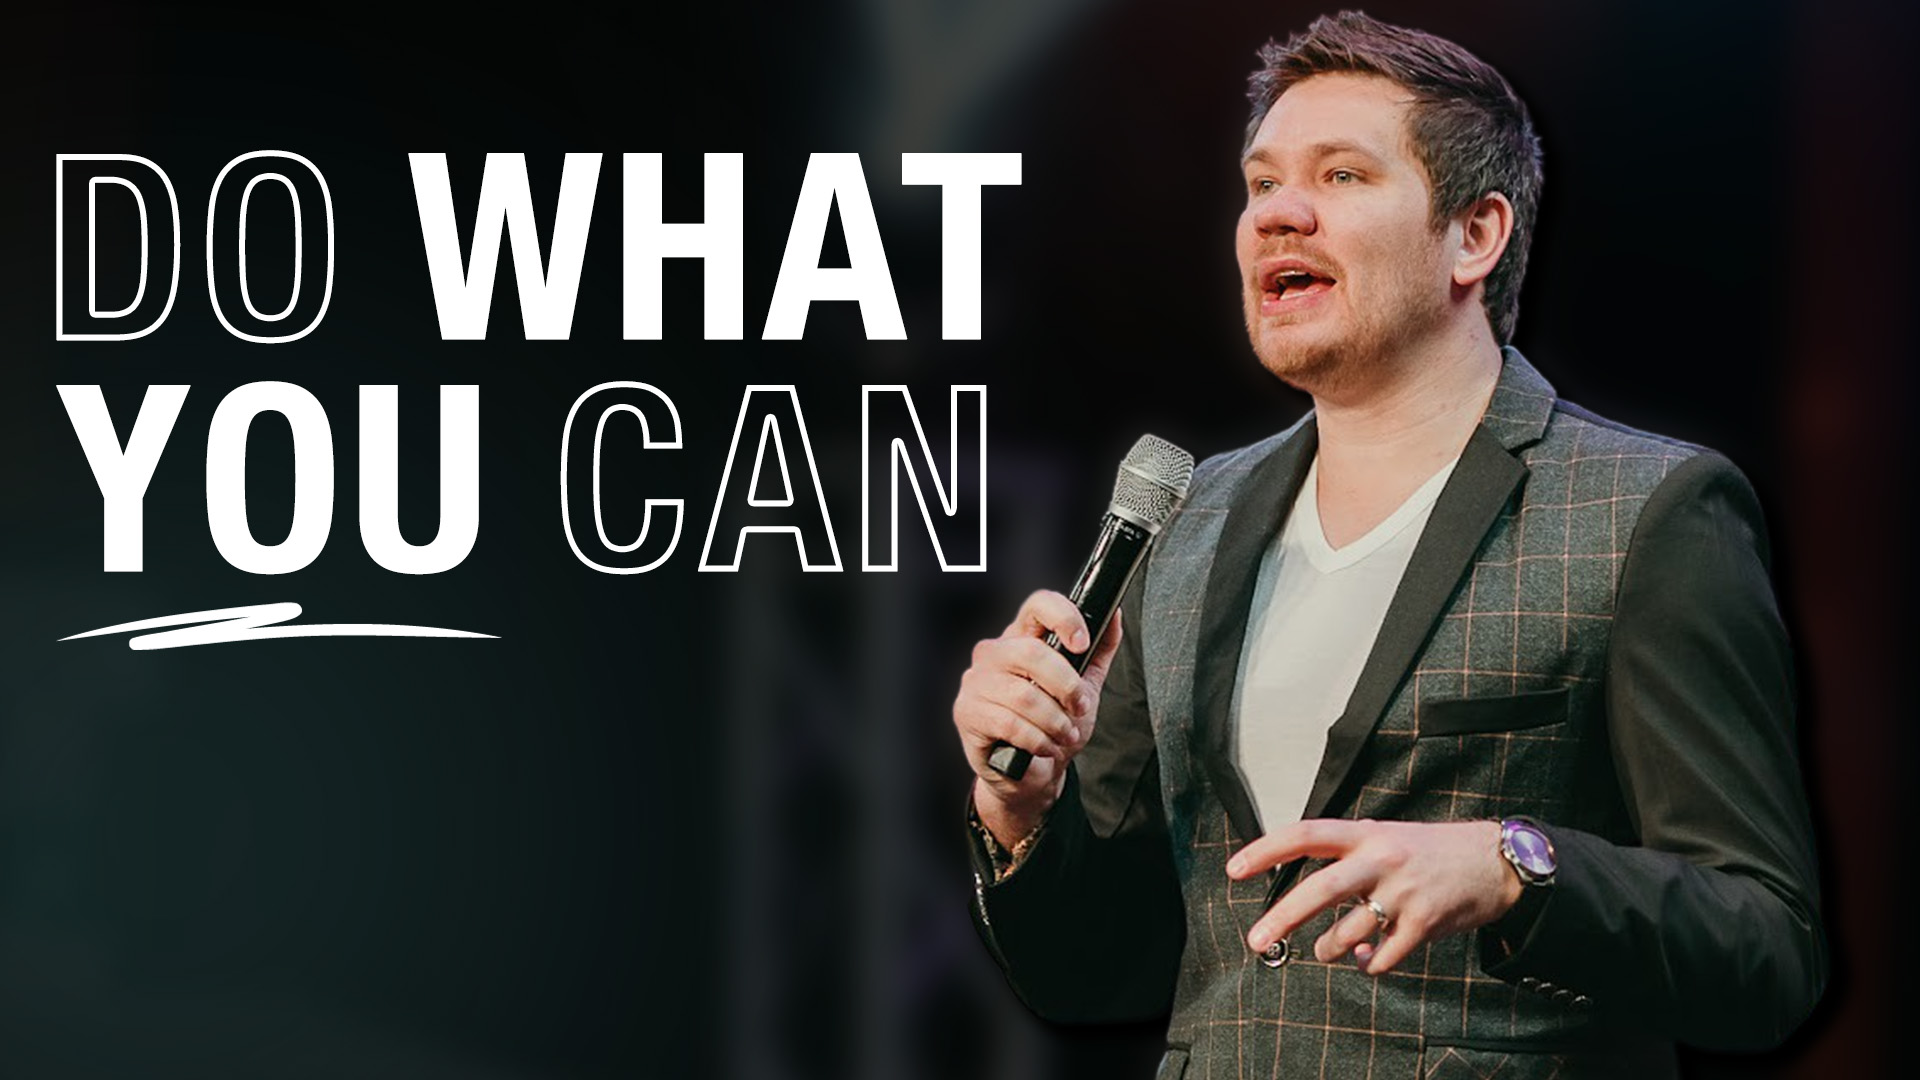 Featured Image for “Do What You Can”